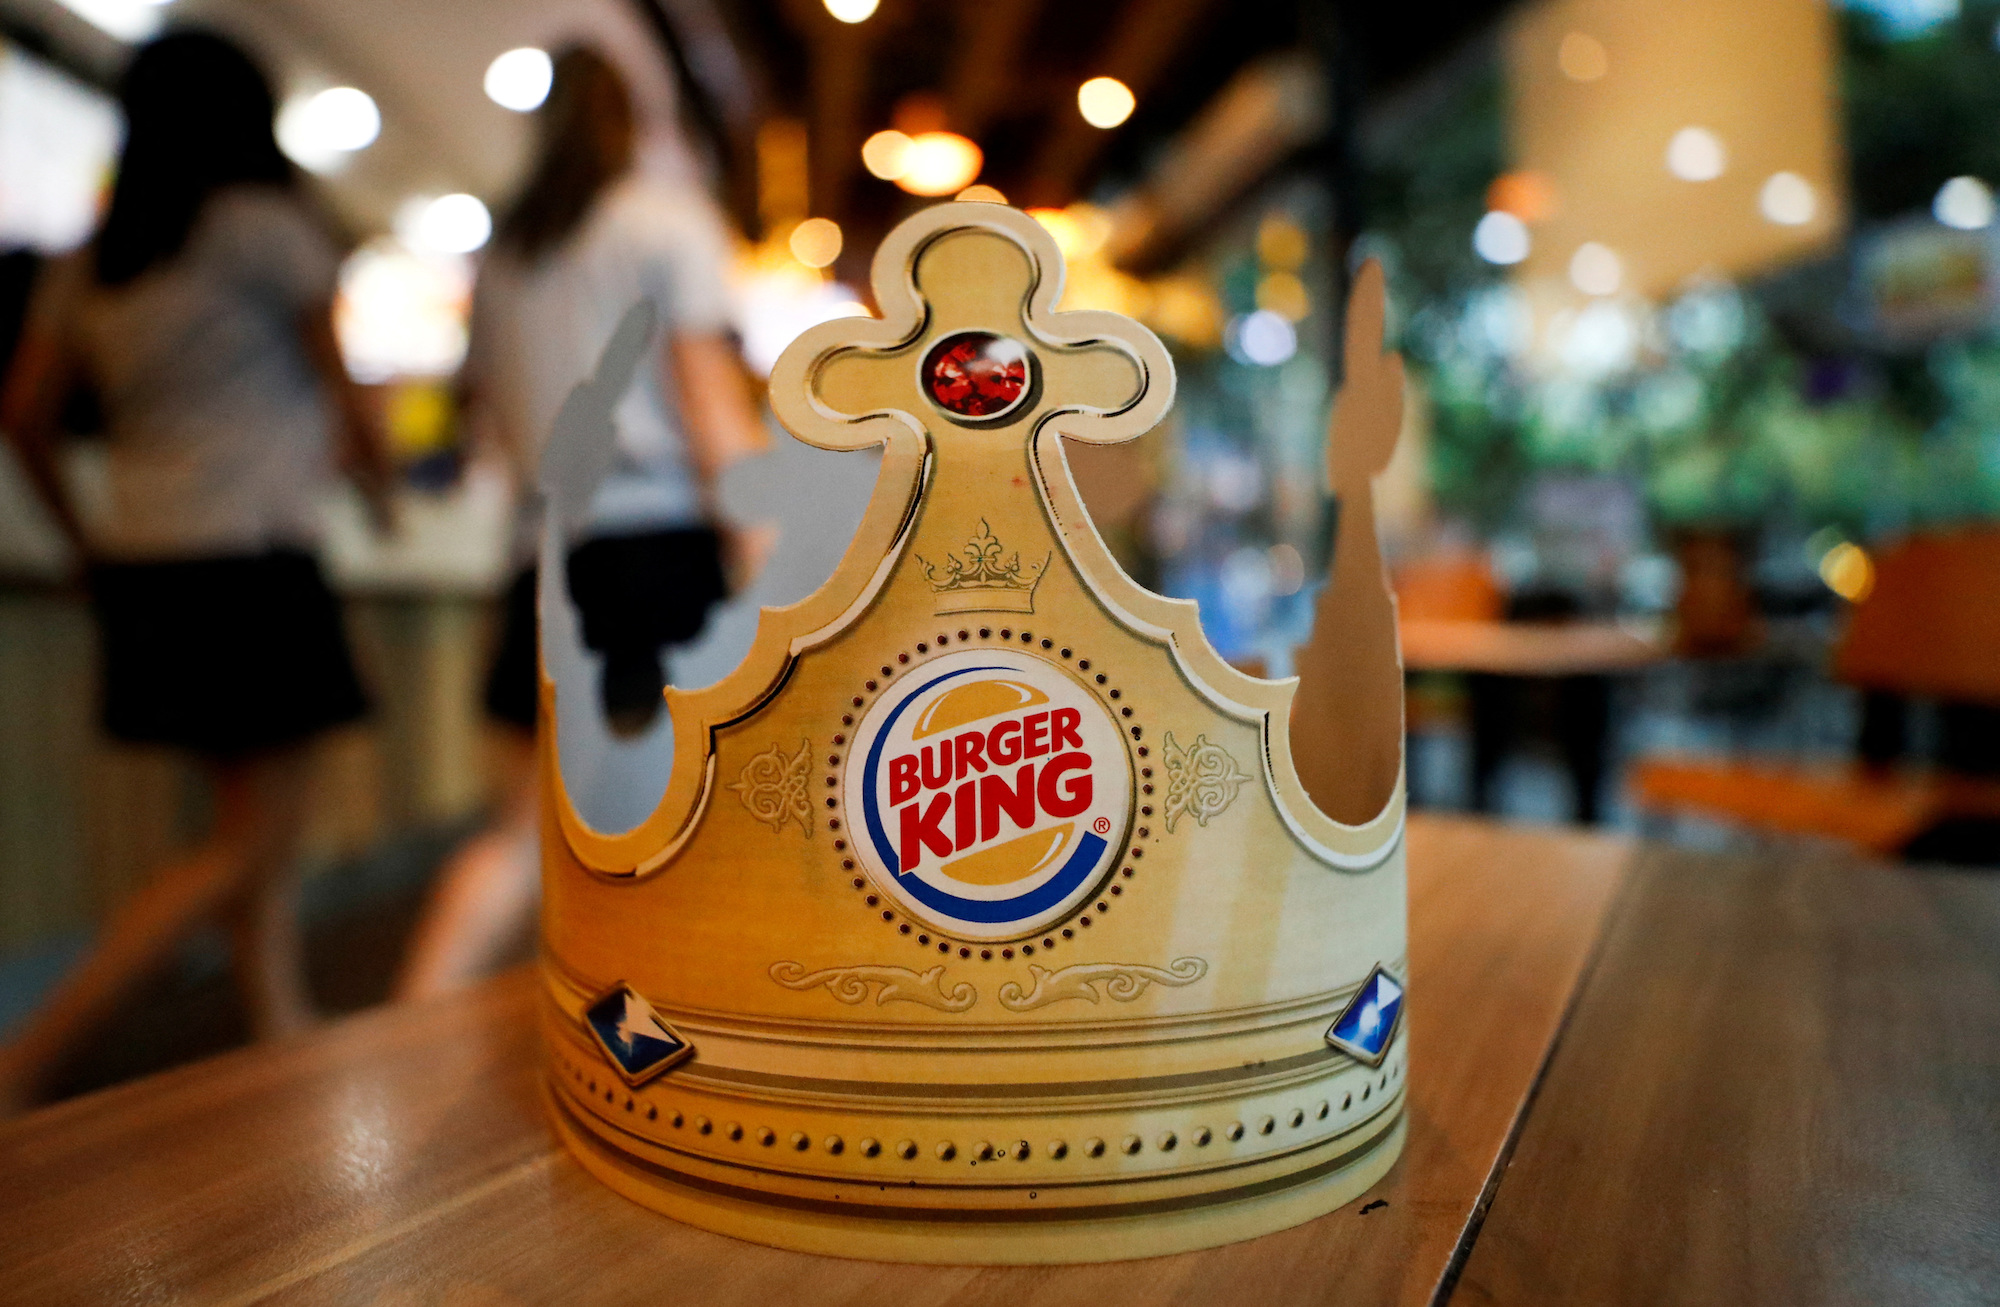 FILE PHOTO: A paper crown is seen at a Burger King restaurant in Bangkok, Thailand, August 26, 2020.